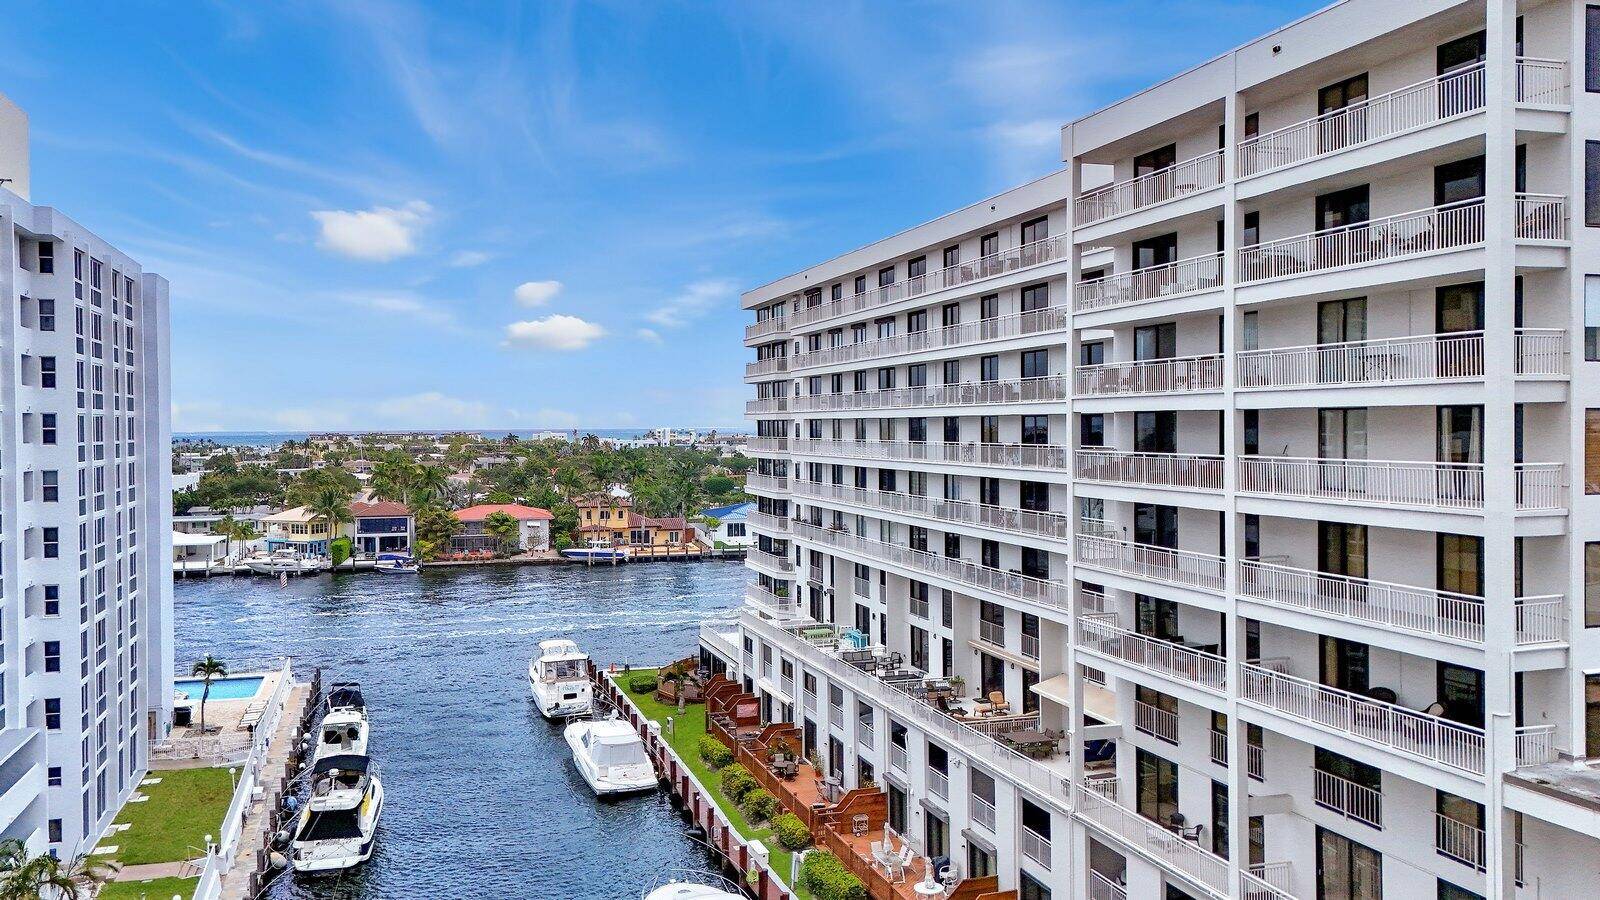 Turn your dream of coastal living into reality with this exquisite intracoastal PENTHOUSE condo boasting 2 bedrooms plus a den and 2 baths.